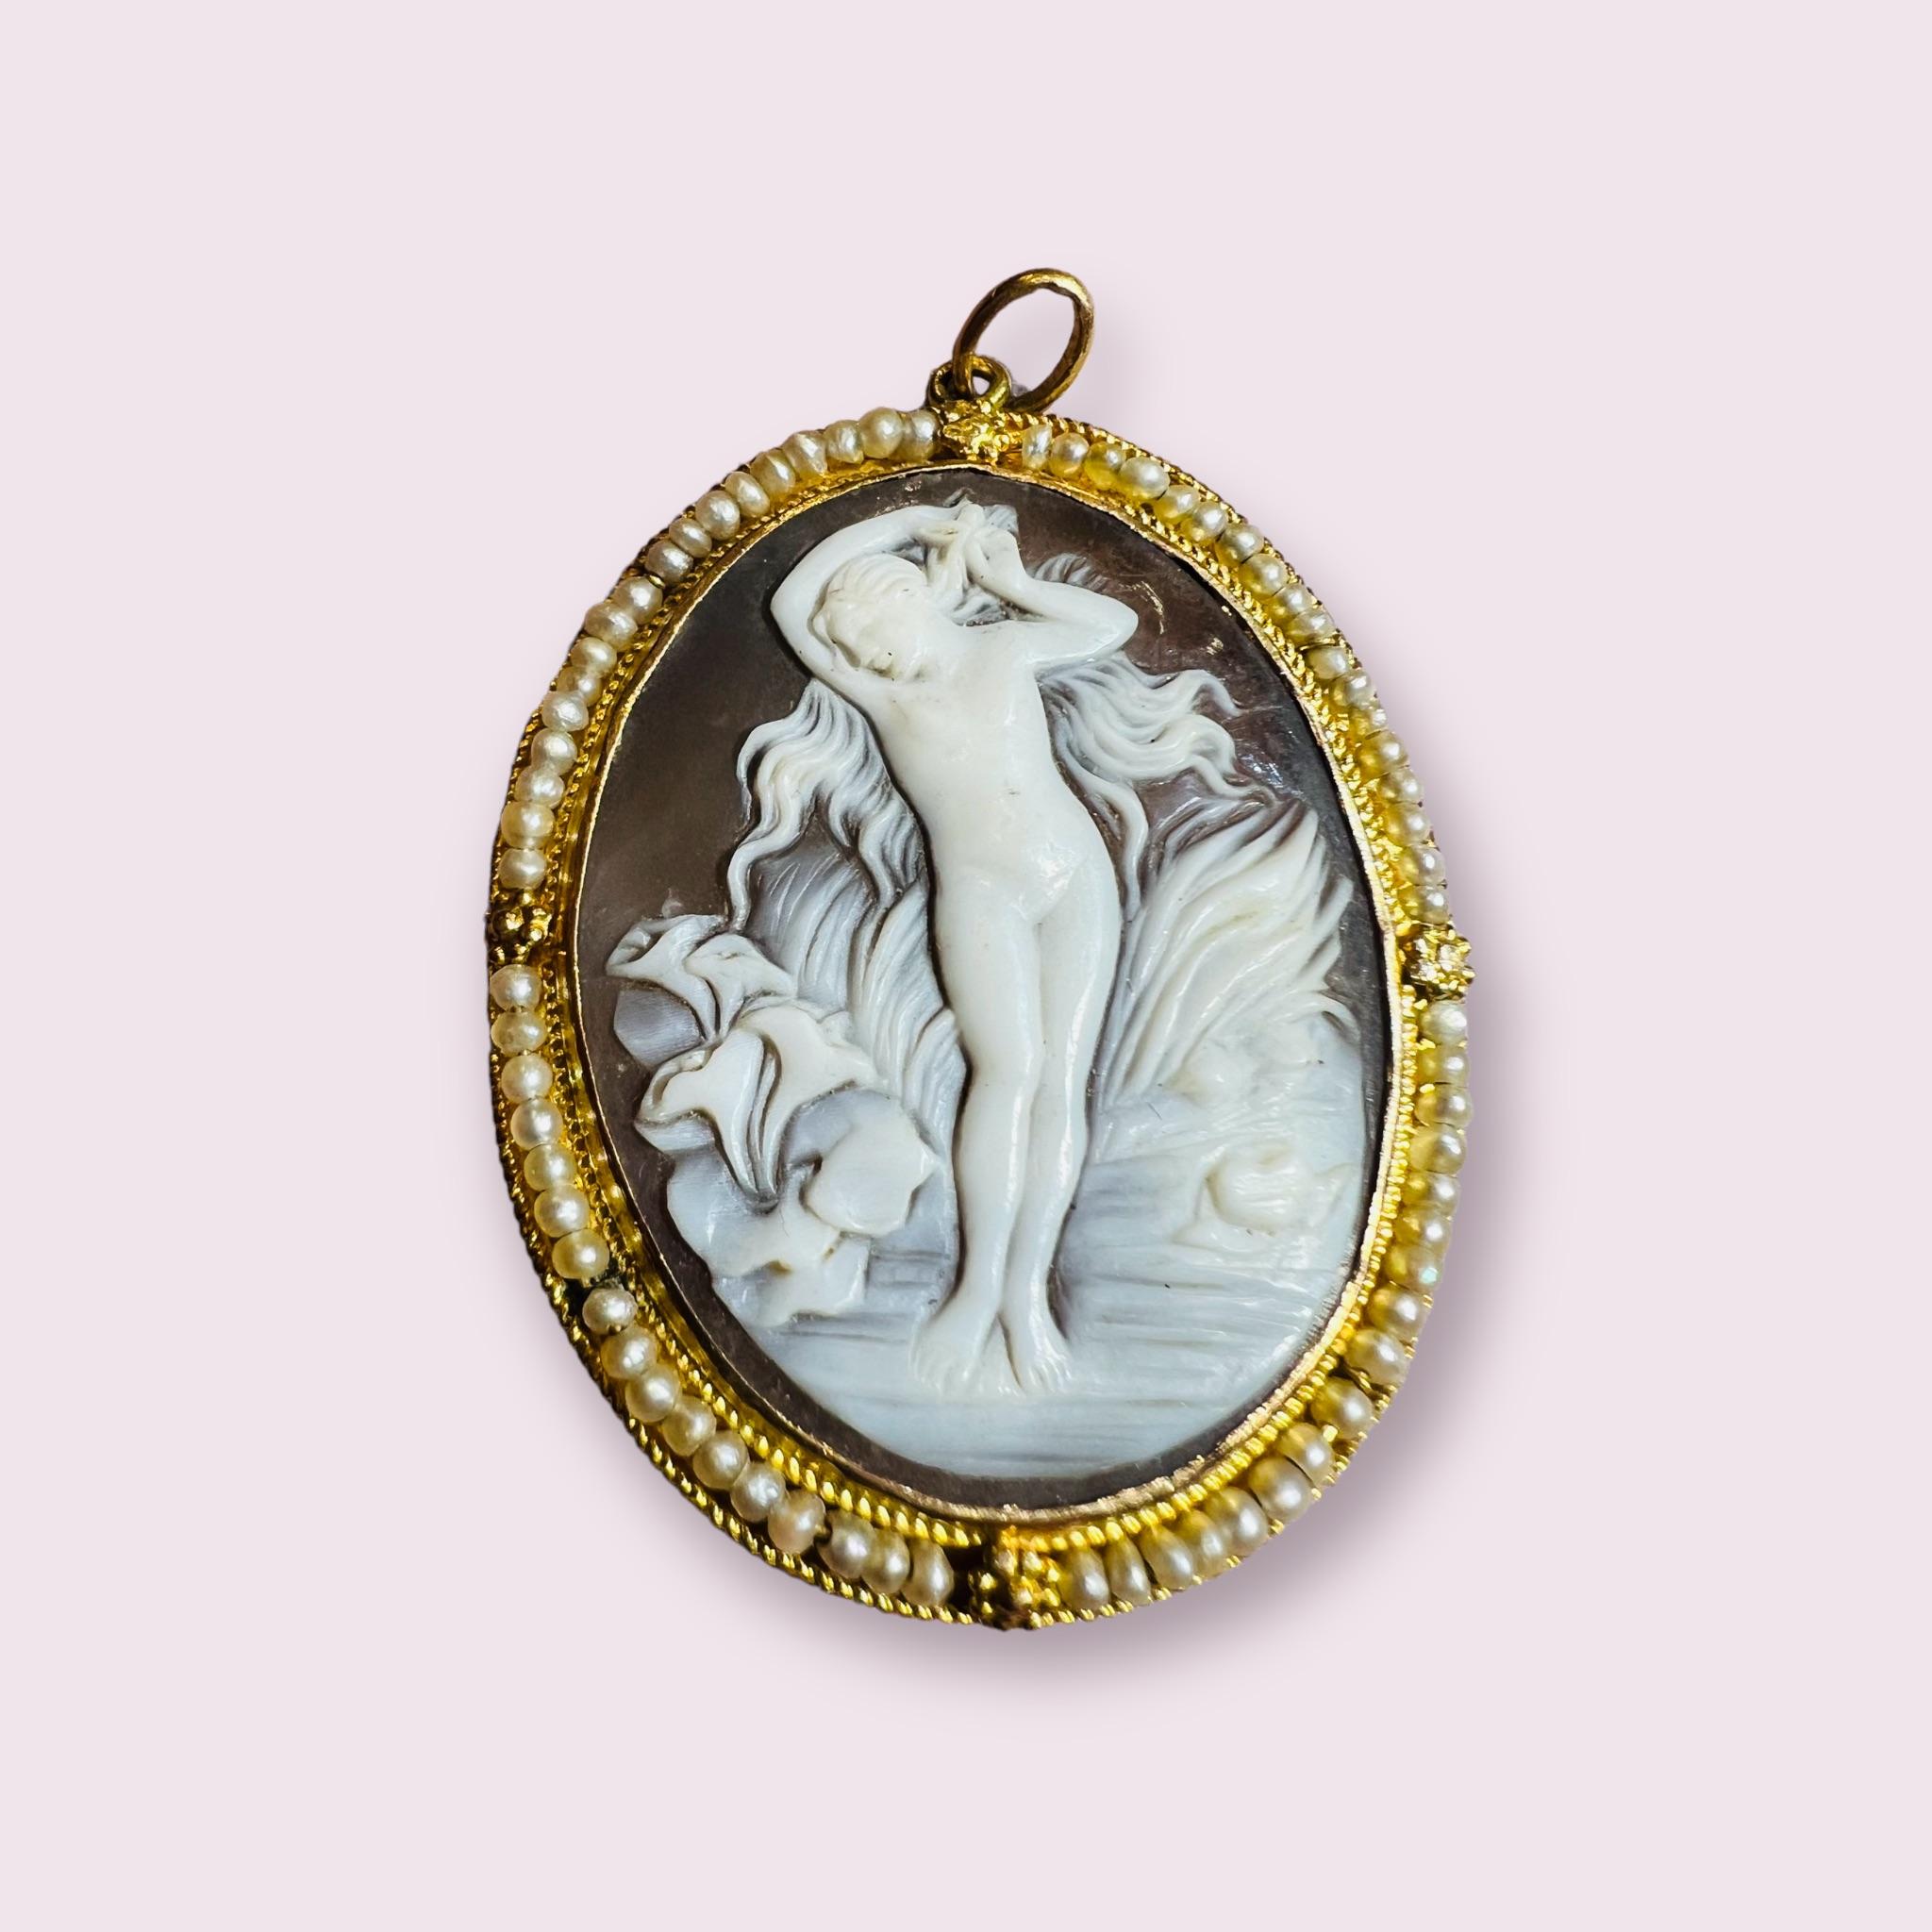 Superb pendant cameo mounted as a pendant surrounded by fine pearls
total weight: 10.10 g oval shape: 4.5 cm by 3.5 cm
period 19th century